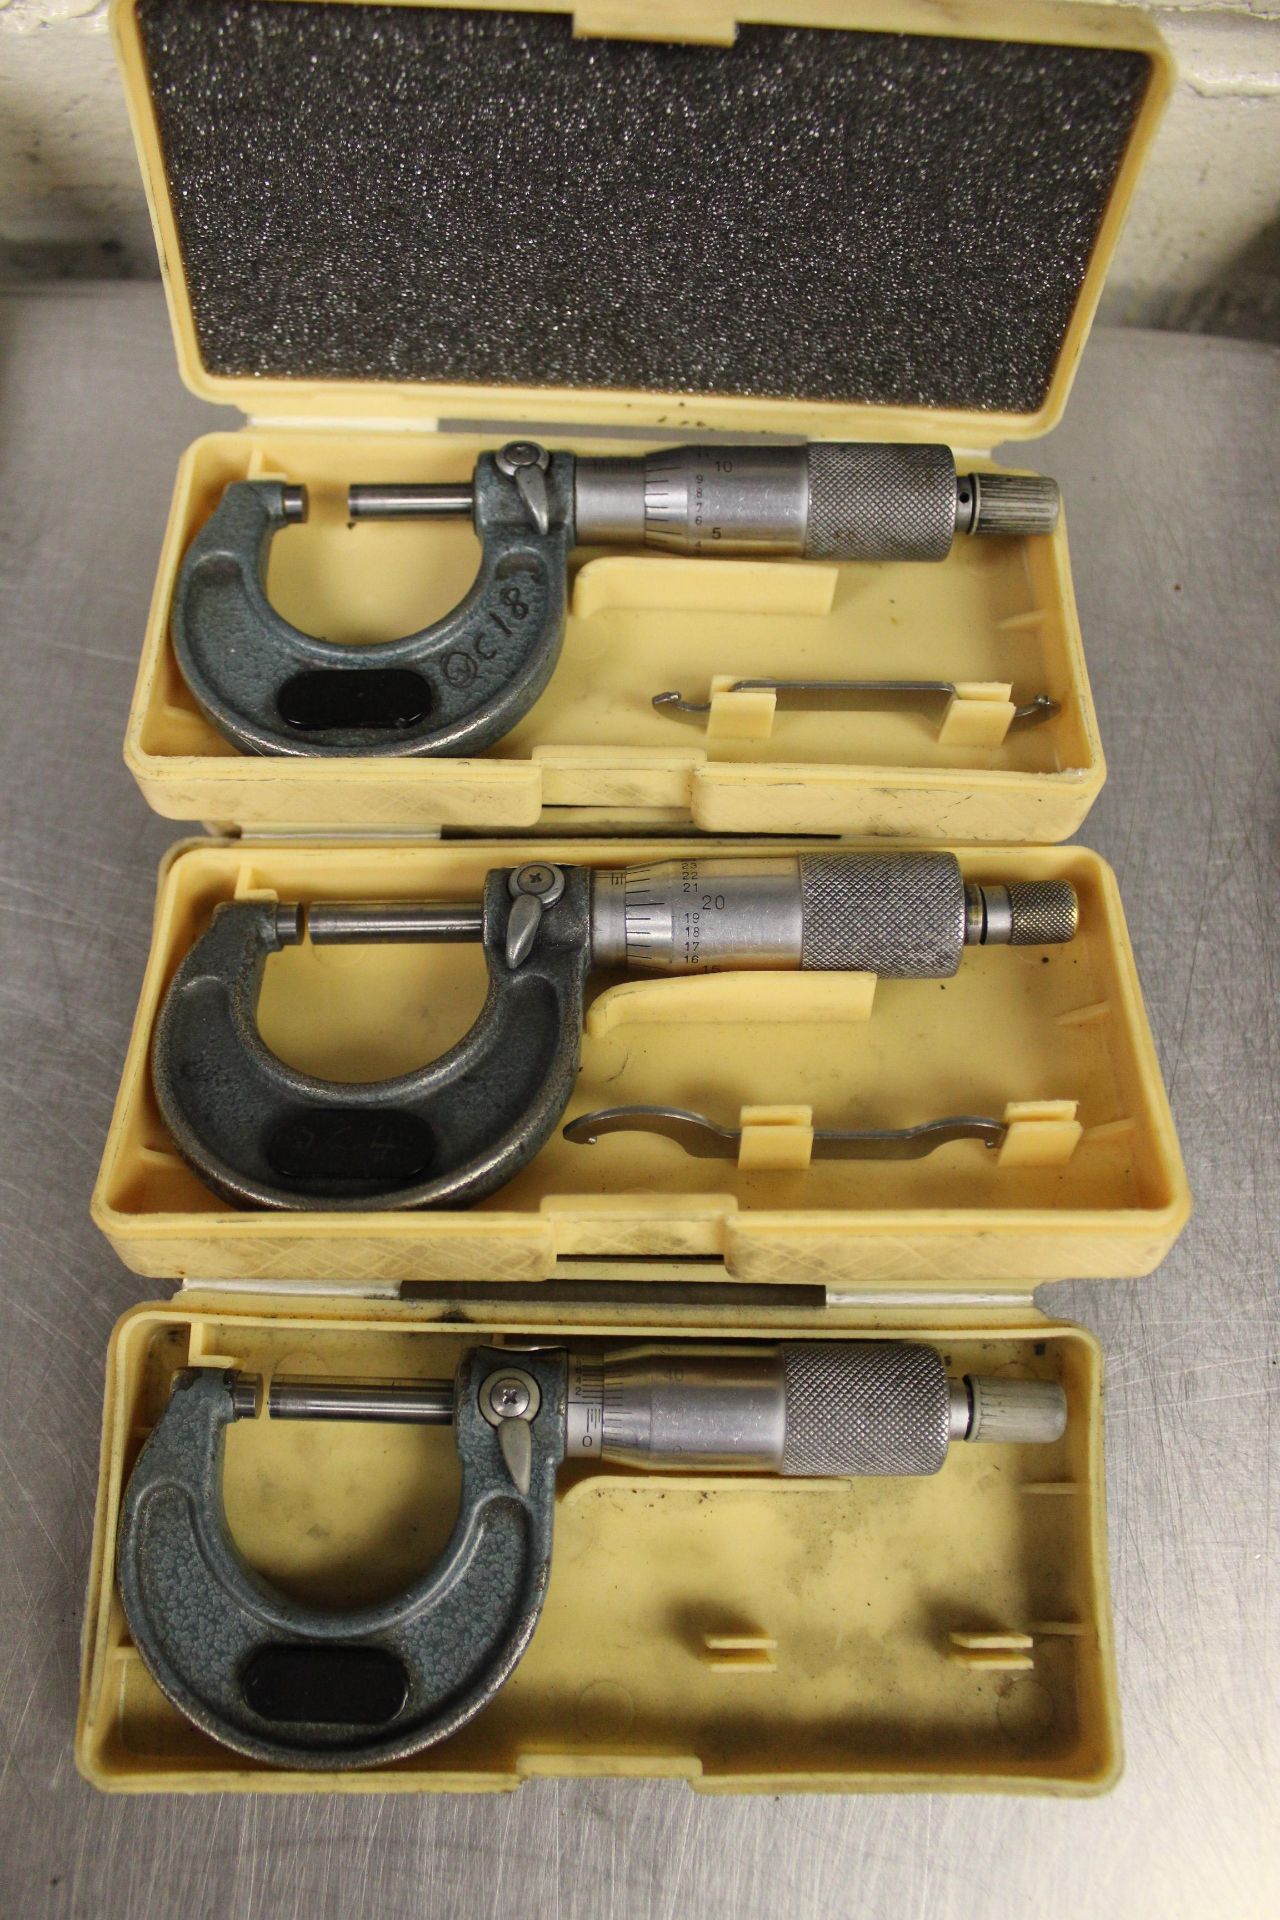 3x Boxed Mitutoyo 0-1"-.001" outside micrometers